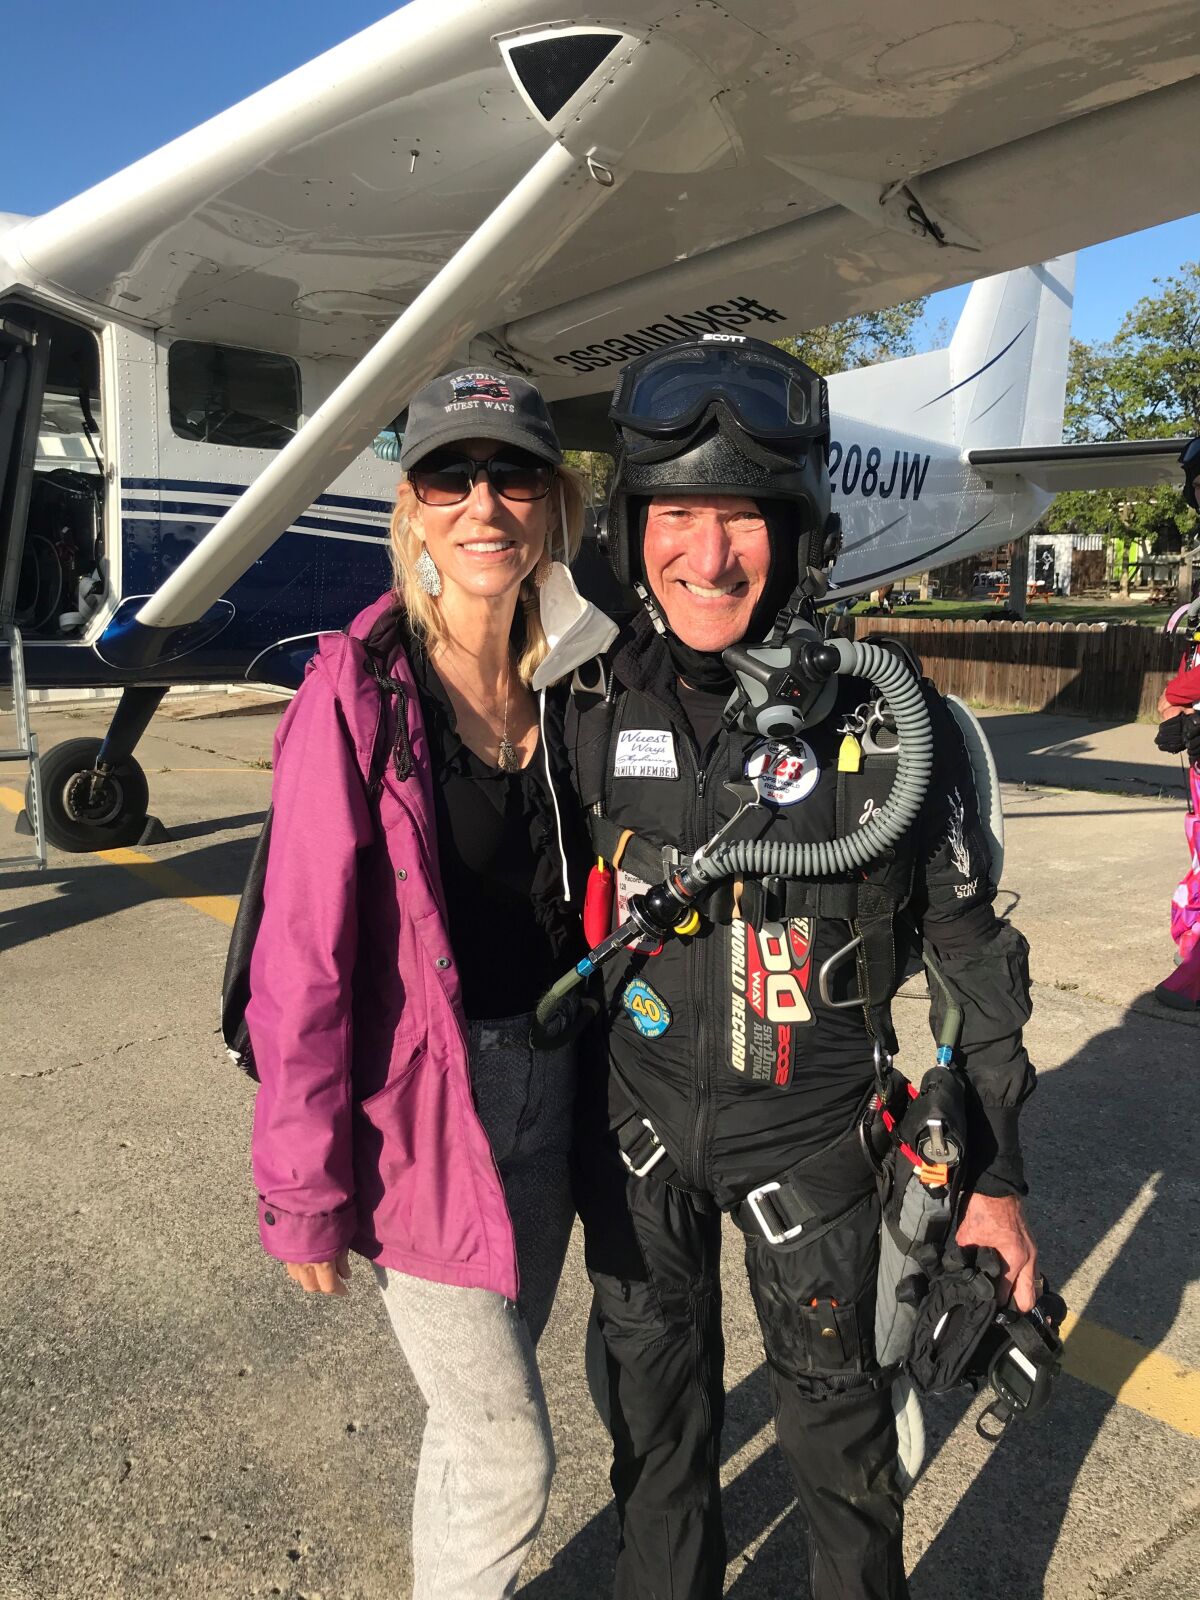 Jerry Jackson and wife Nina Jackson just before boarding an aircraft for the 30,000-foot record skydive.